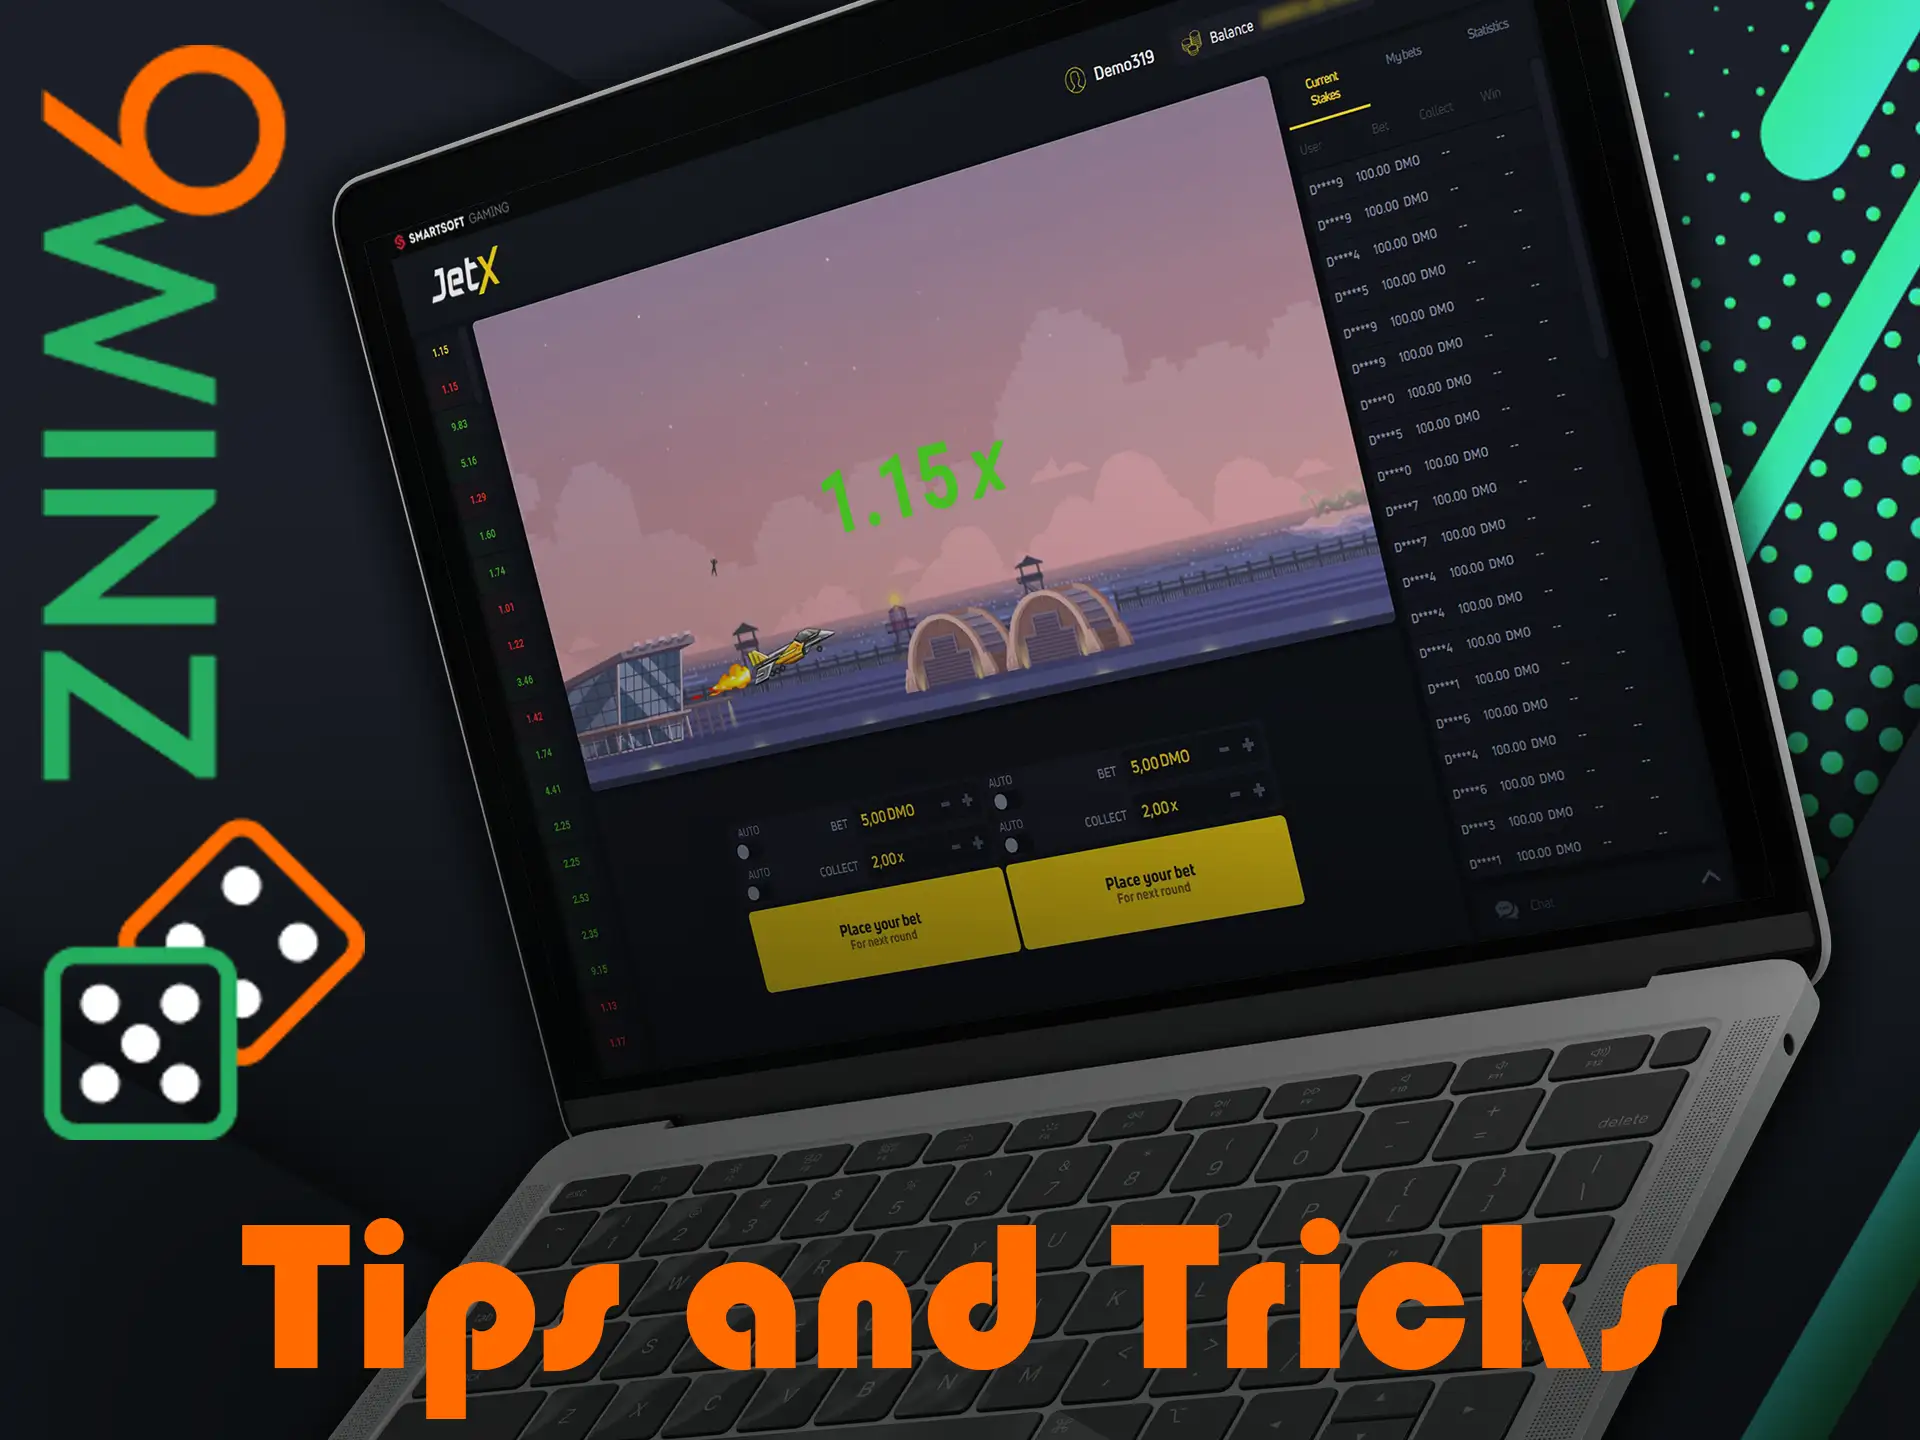 Use 9Winz tips and tricks to win at the JetX game.